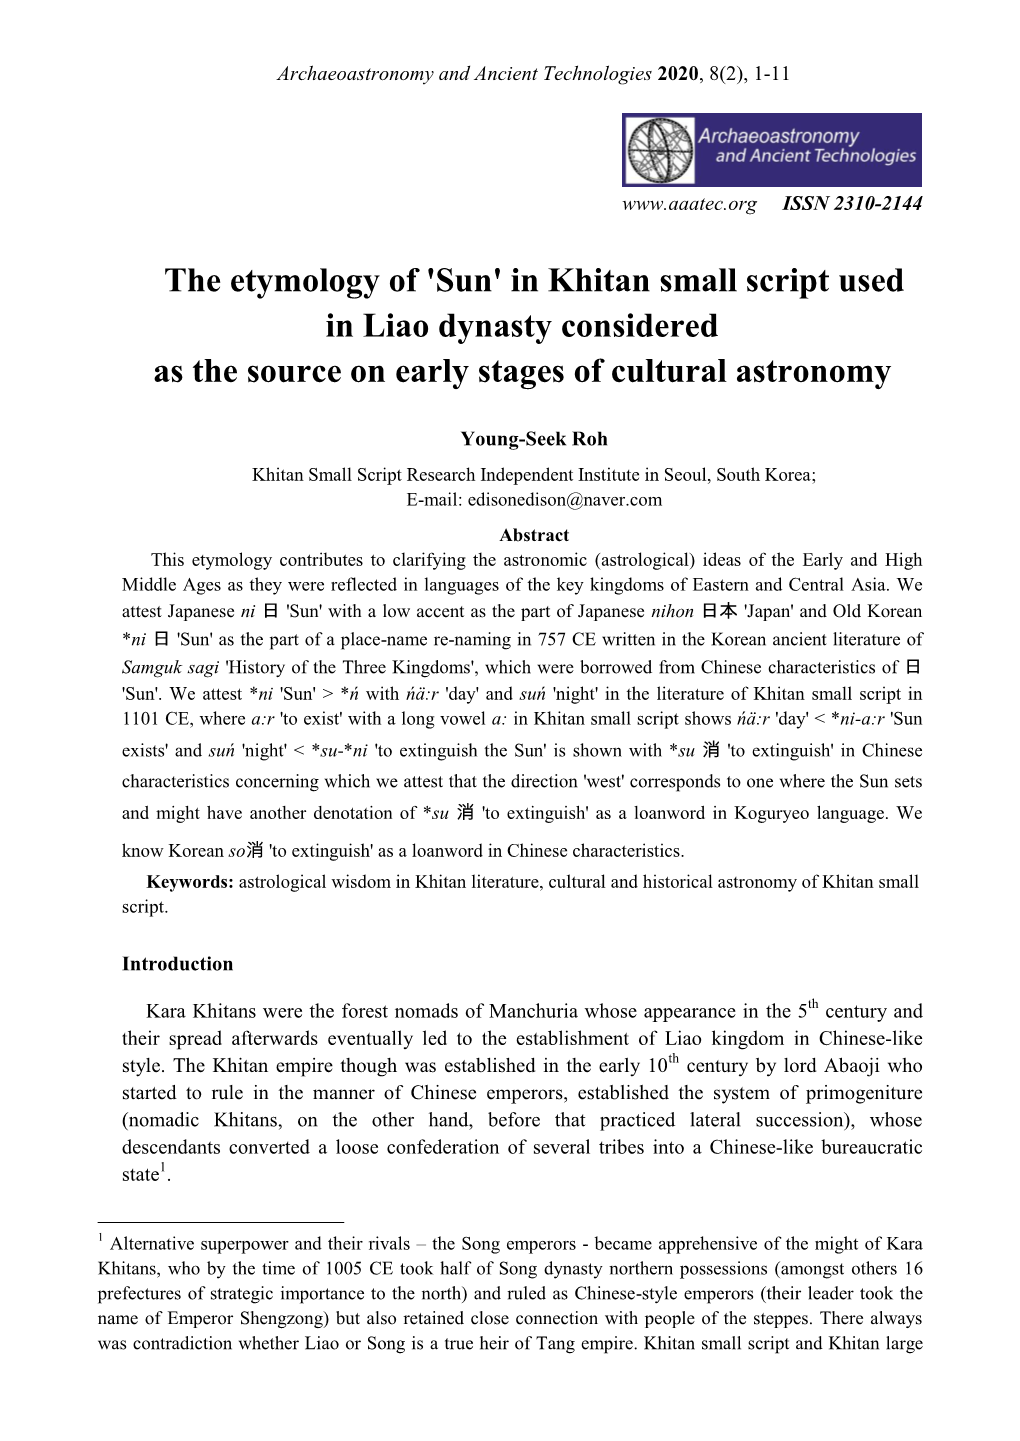 The Etymology of 'Sun' in Khitan Small Script Used in Liao Dynasty Considered As the Source on Early Stages of Cultural Astronomy